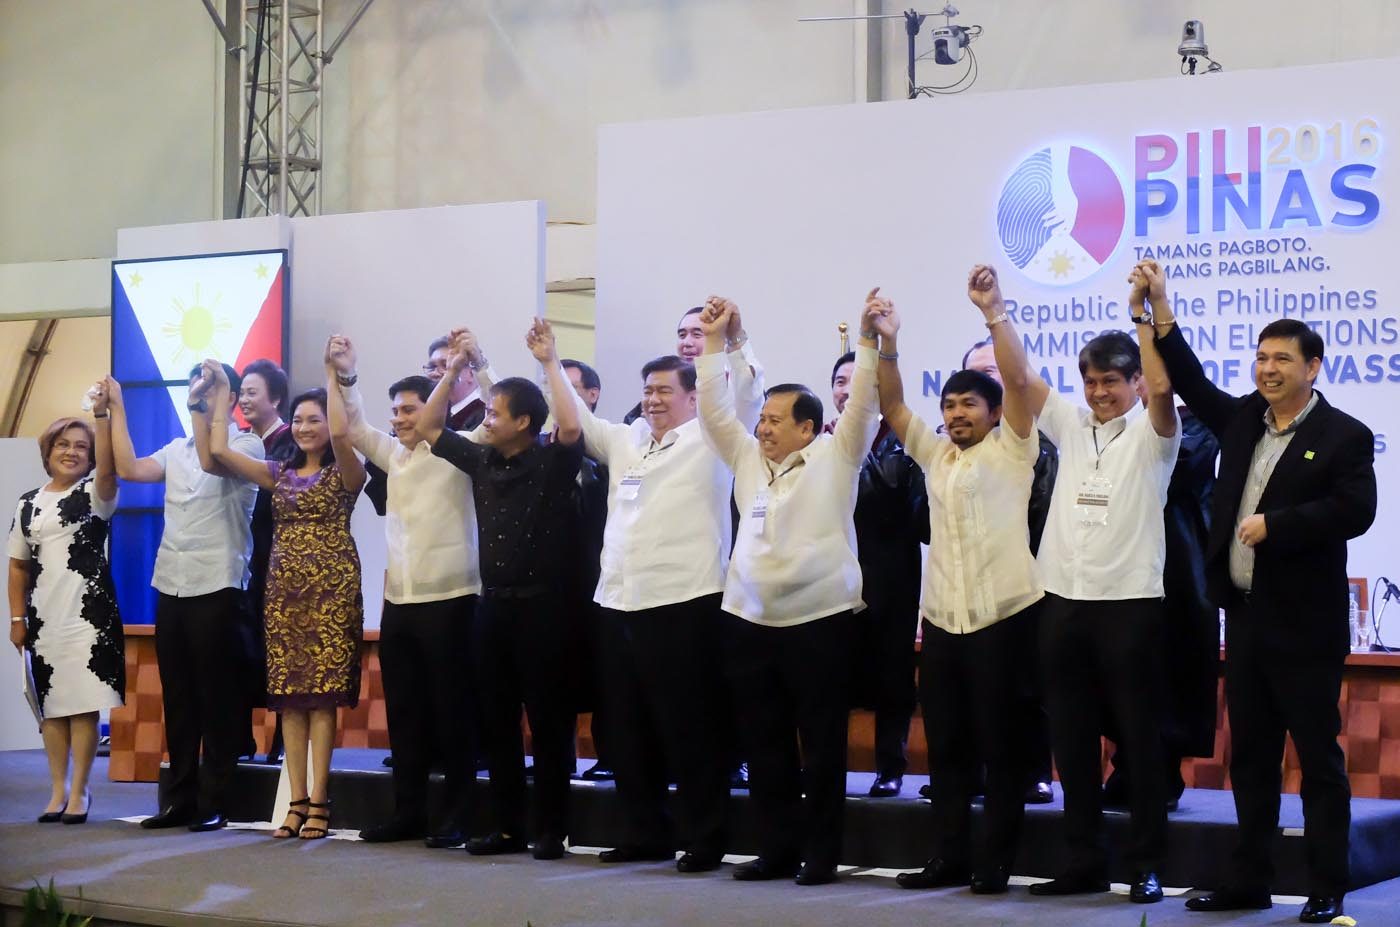 Newly-elected senators: Can they work with President Duterte?